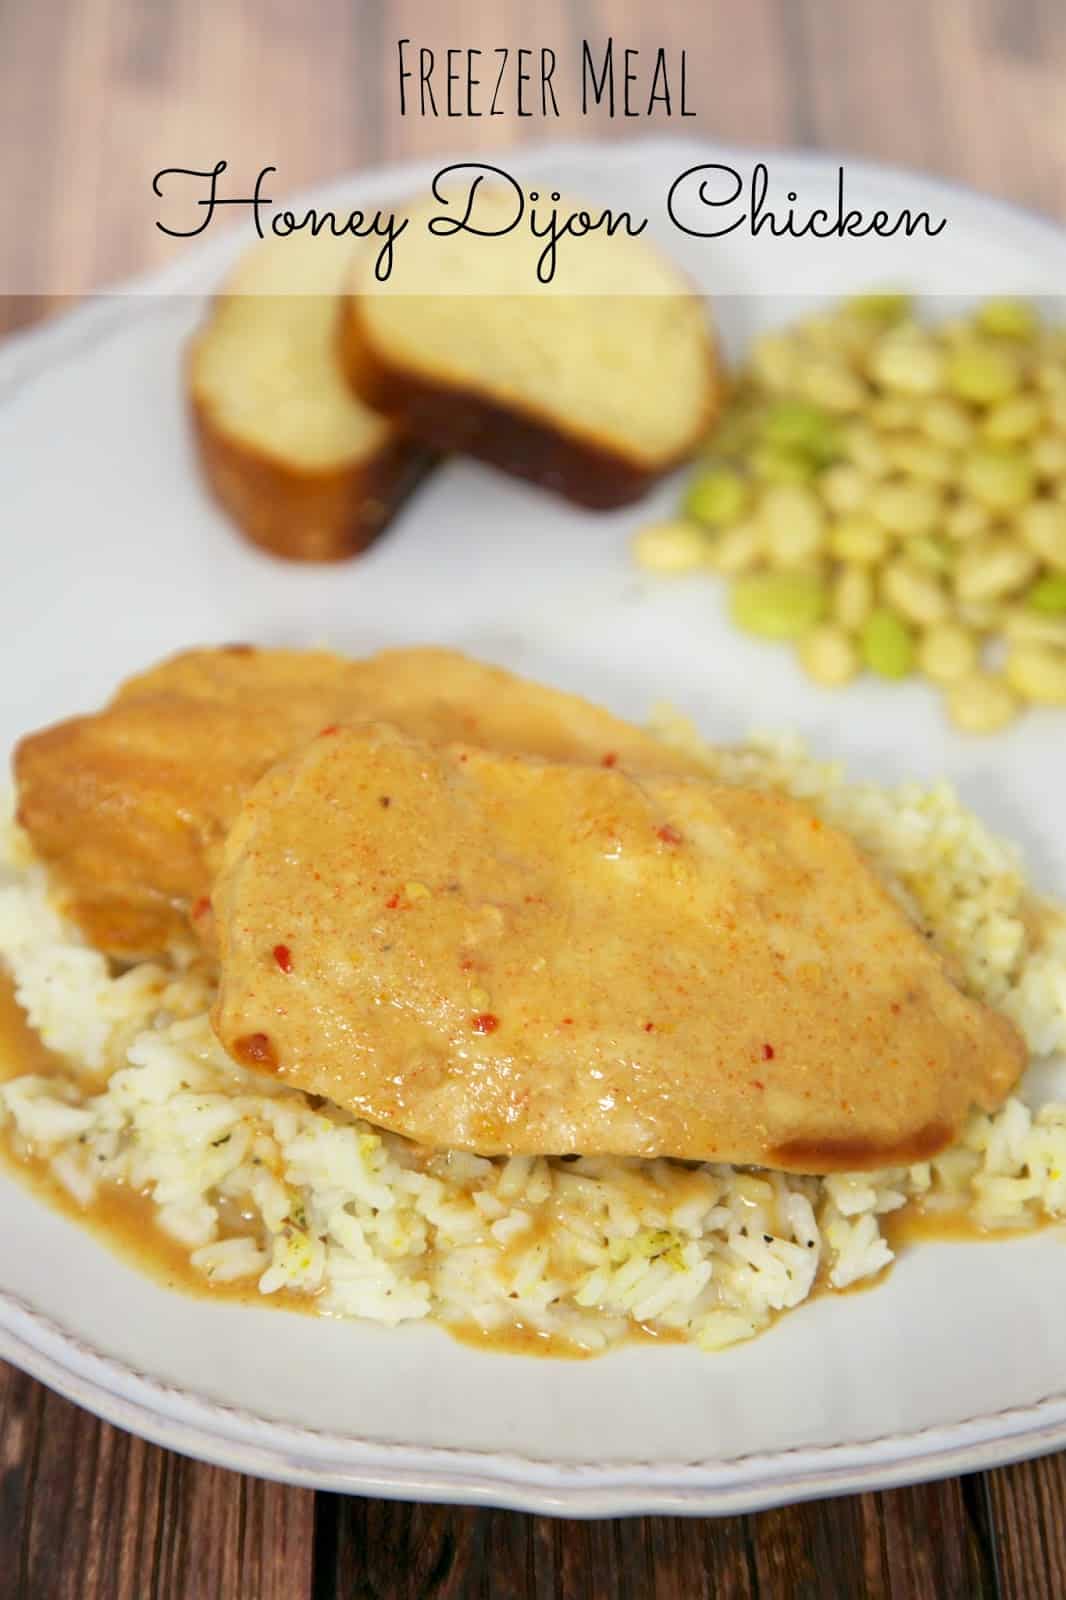 {Freezer Meal} Honey Dijon Chicken - chicken, honey, dijon mustard, paprika, onion powder, chicken broth and red pepper flakes. Mix everything together in a freezer bag and freeze. Put in the slow cooker when ready to eat. Can put it in frozen! Everyone cleaned their plates!!! SO easy and SOOO yummy!! #freezermeal #slowcooker #chicken